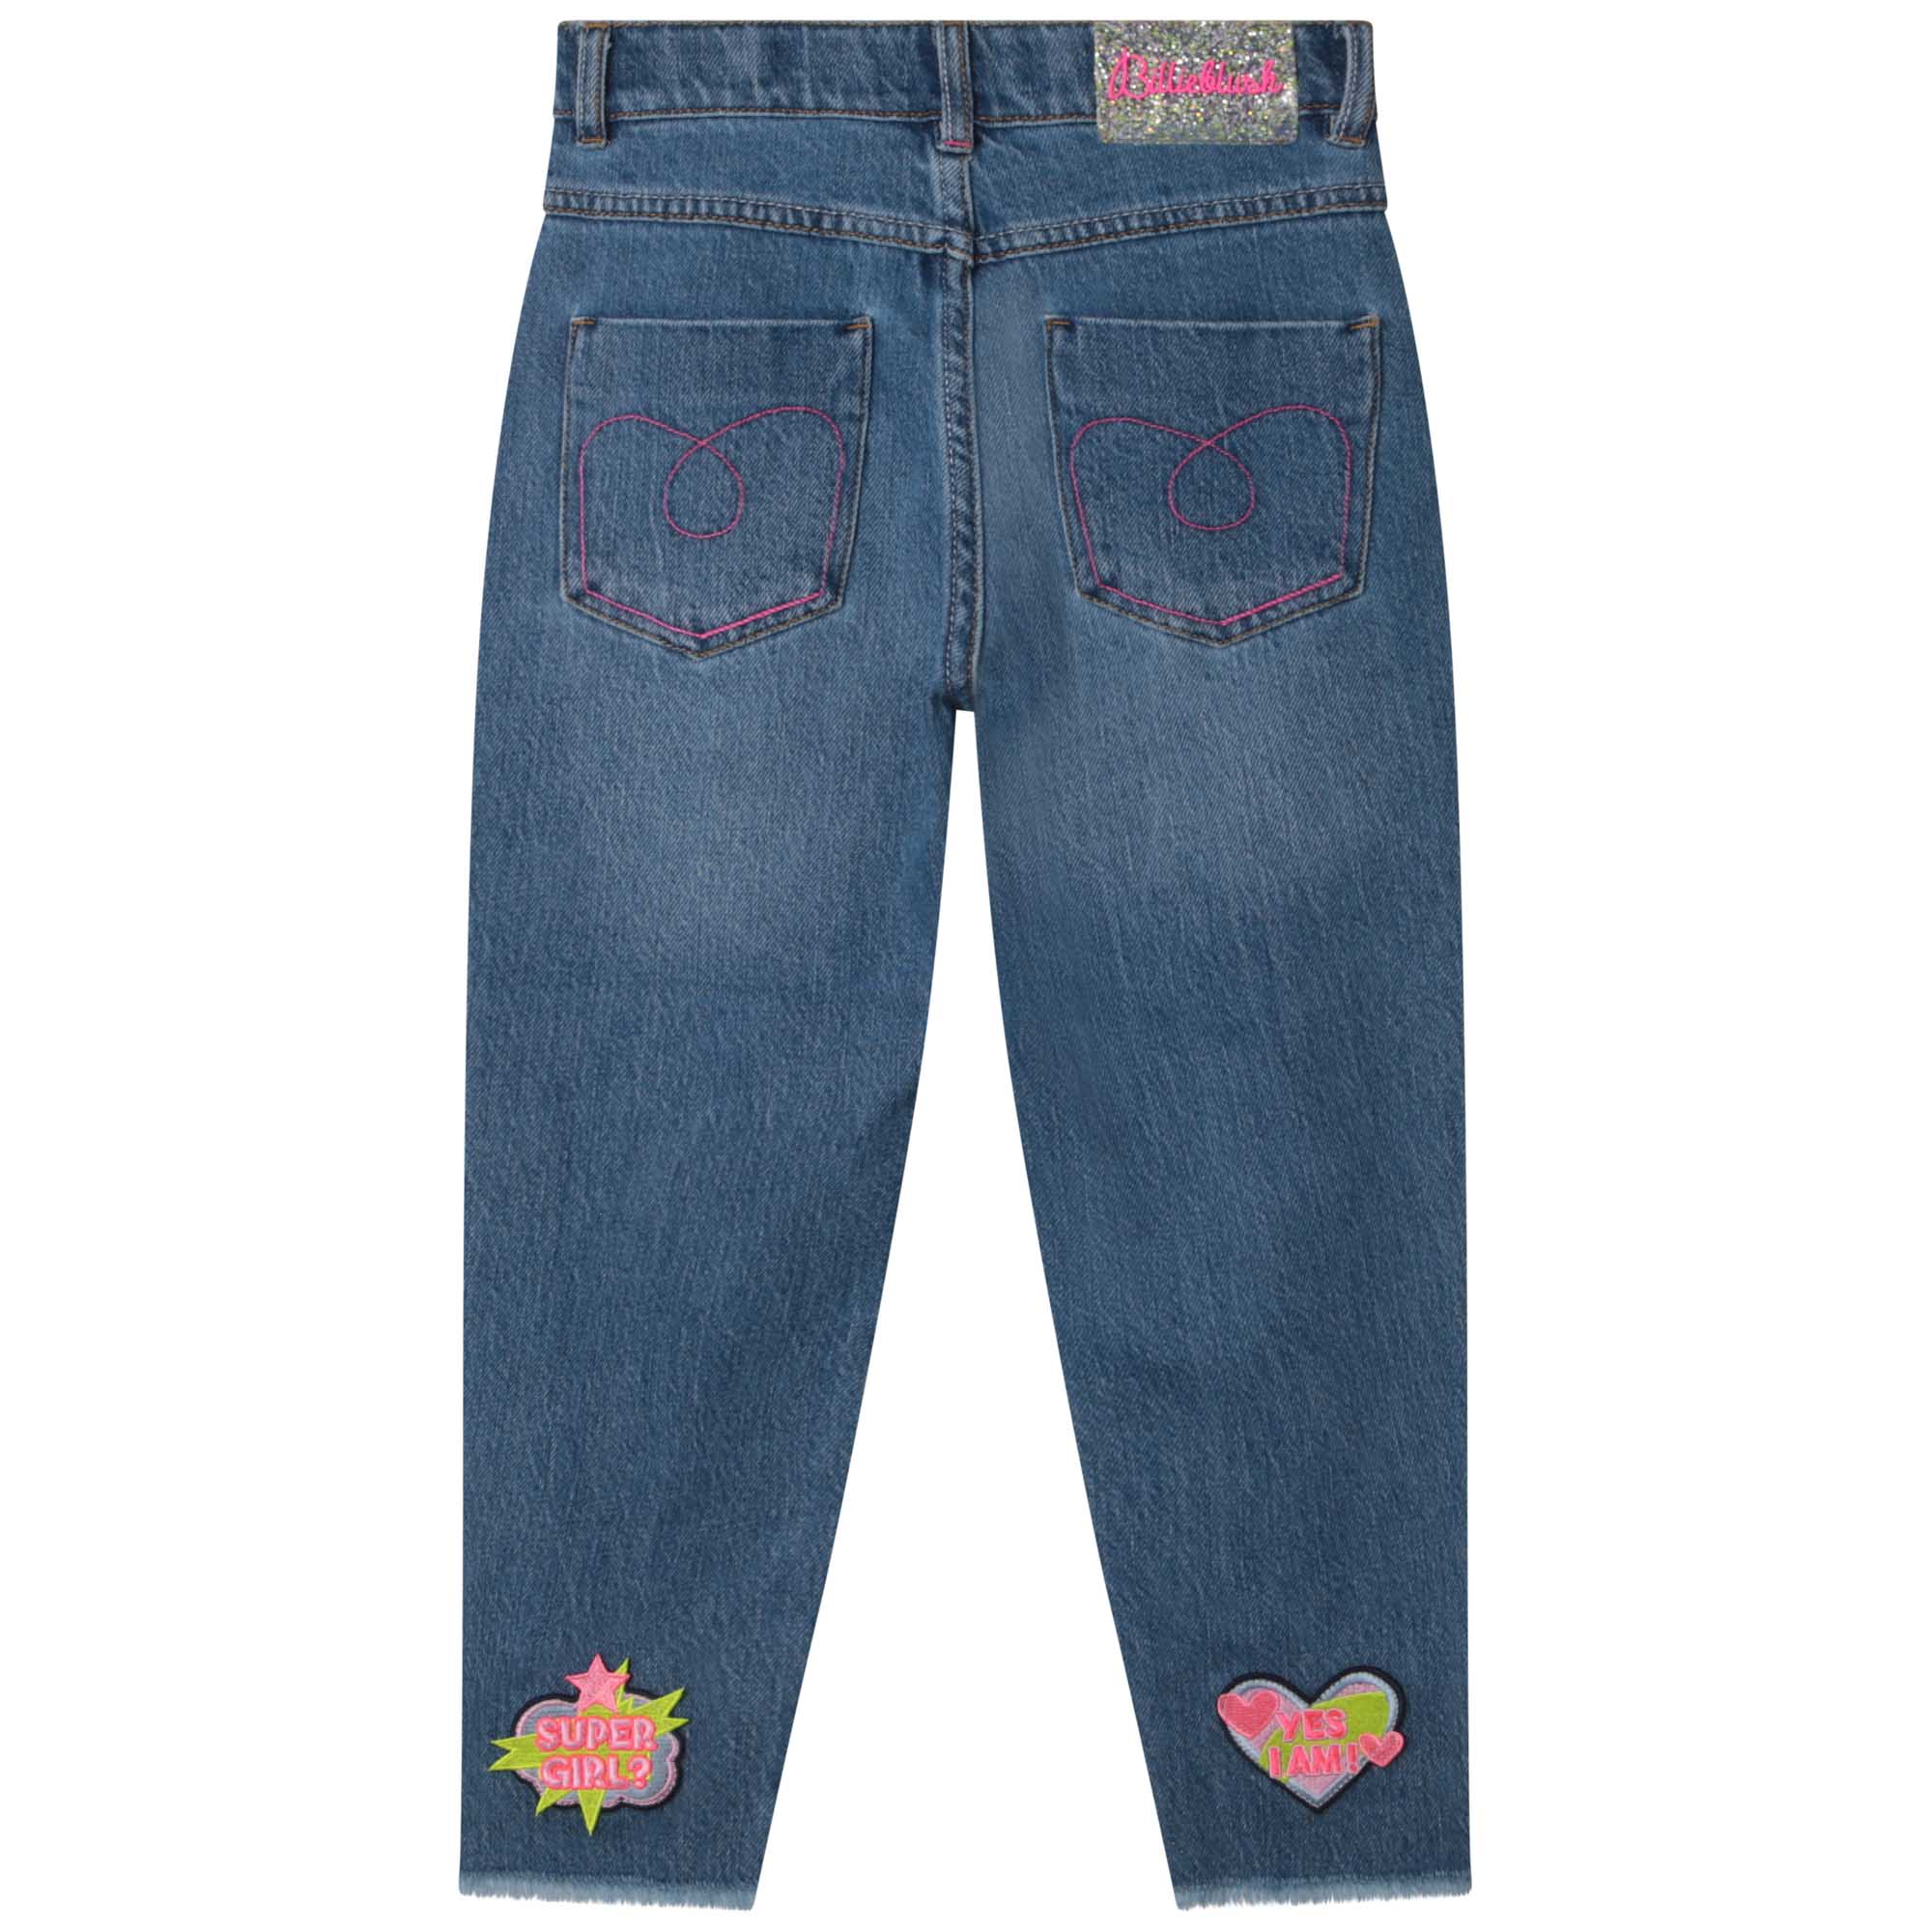 Billieblush girls jeans with heart logos - back view